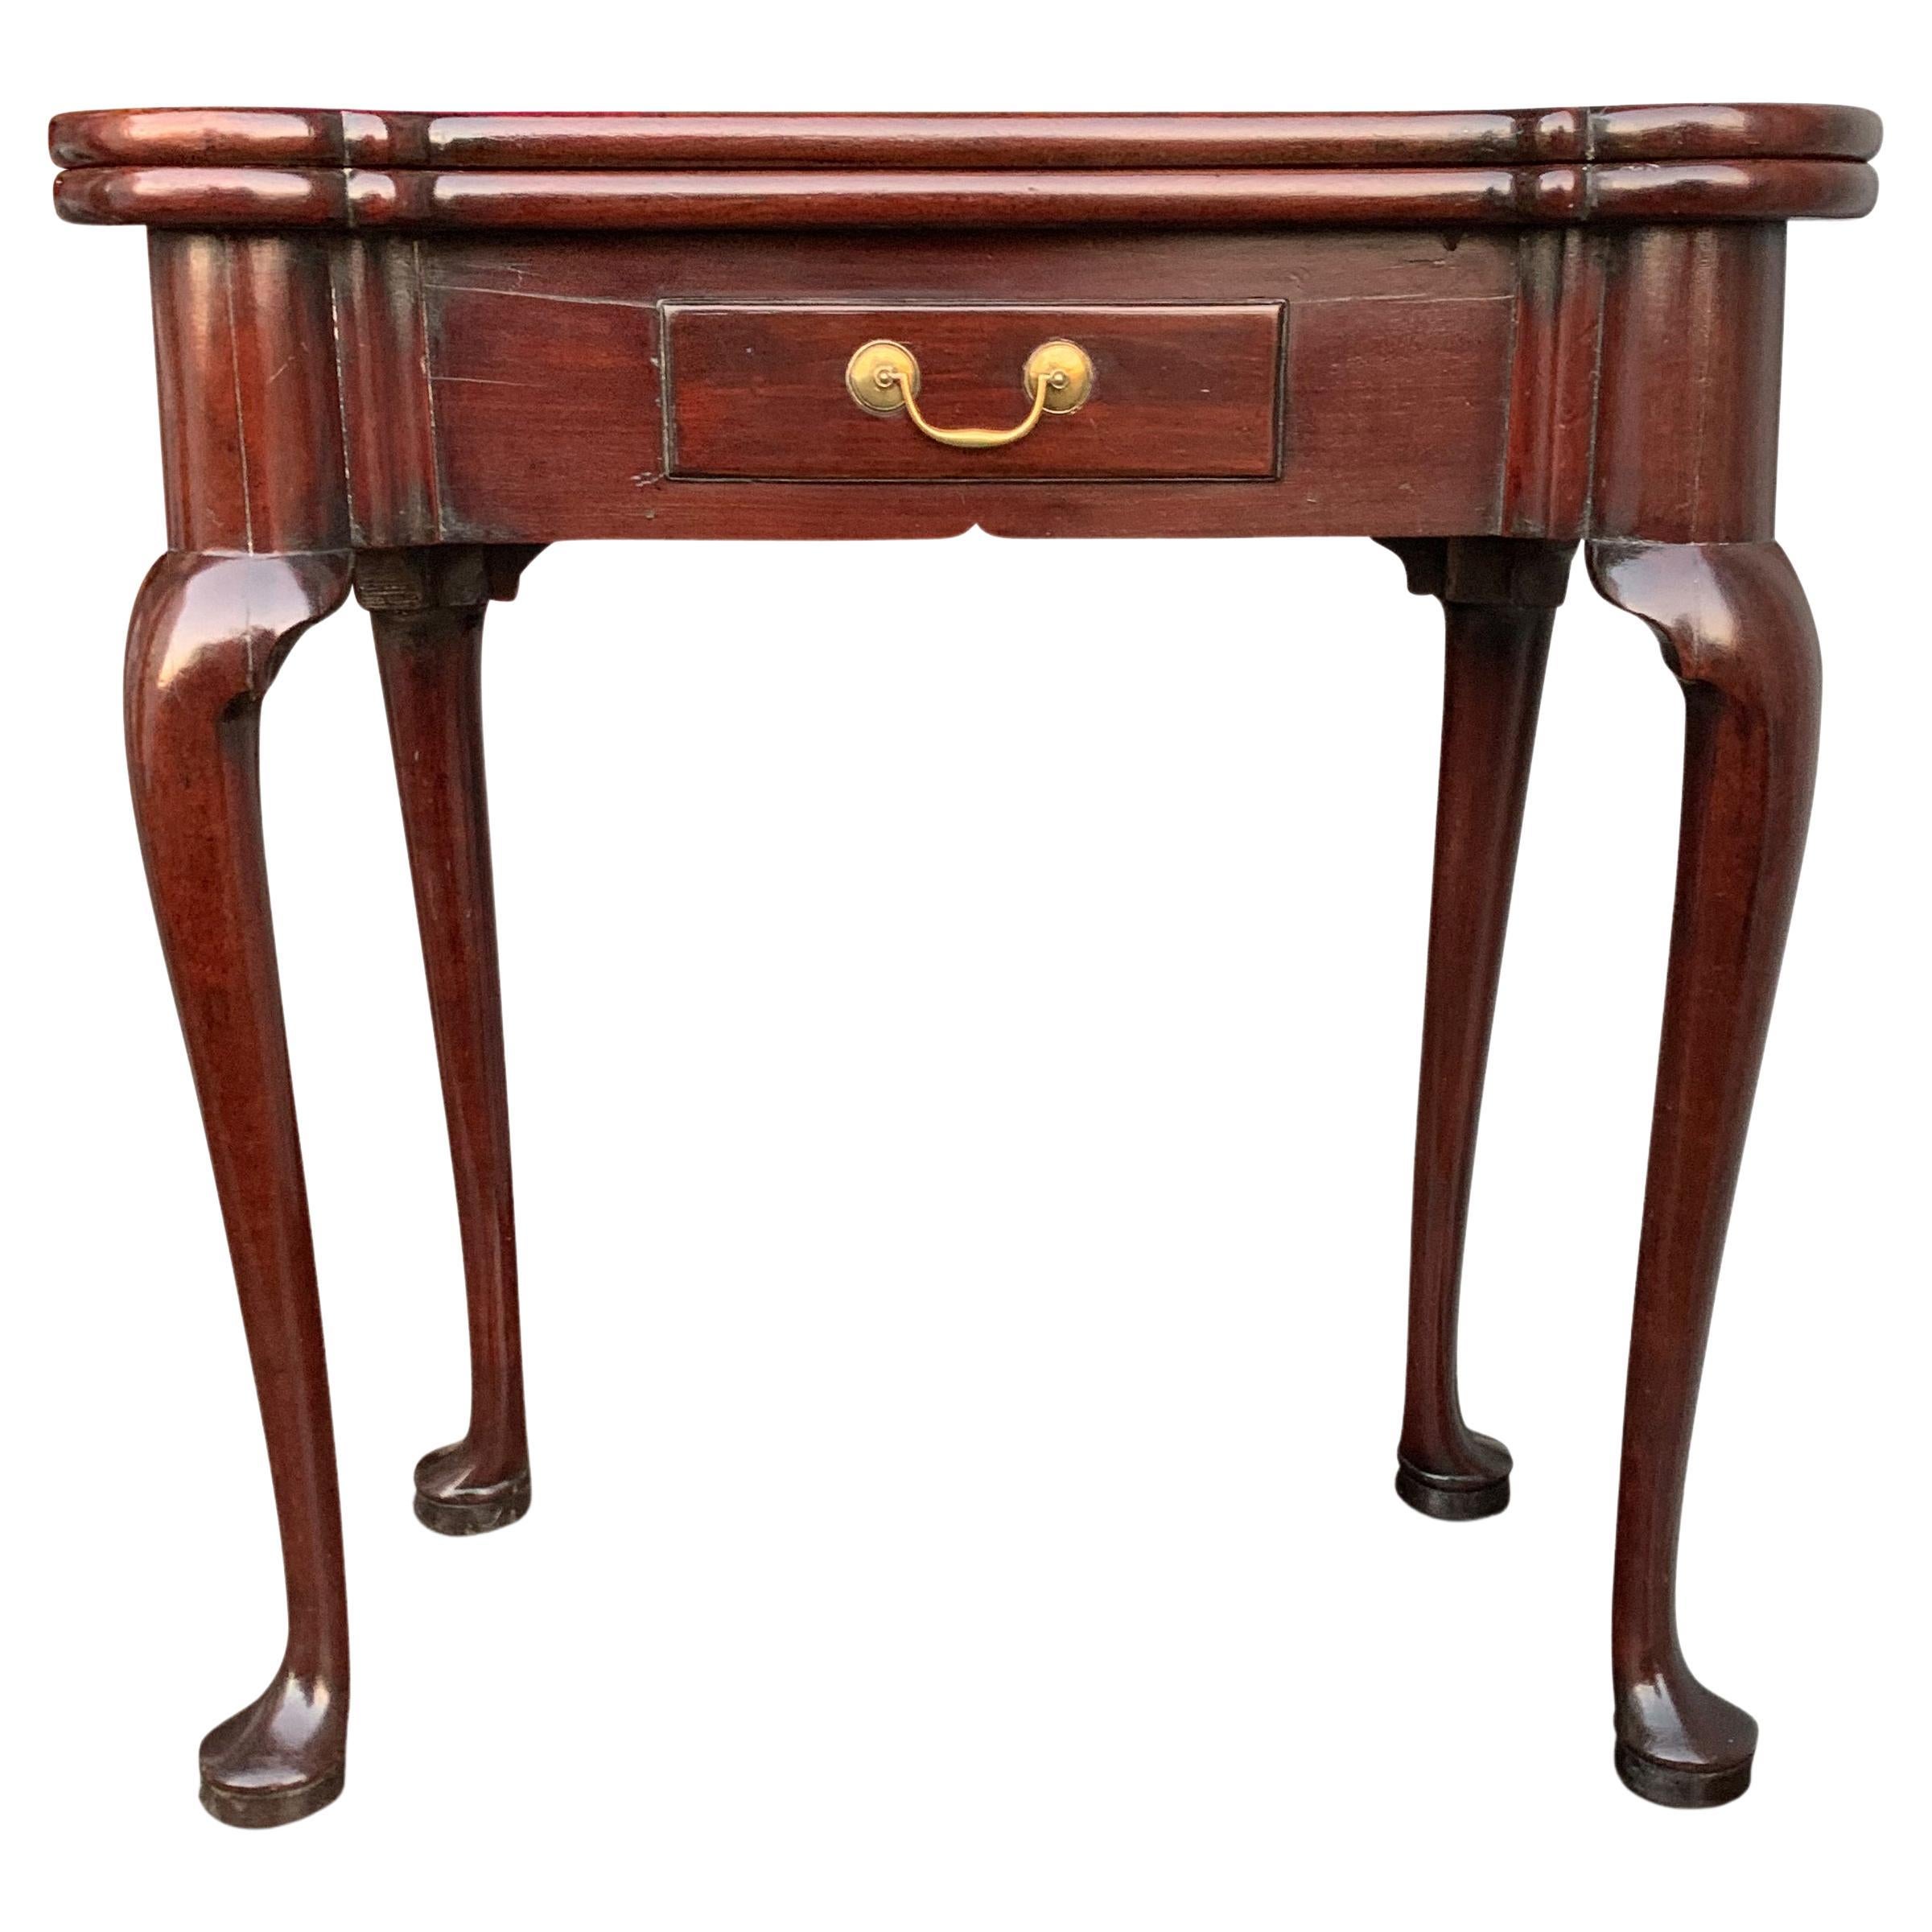 An exquisite Mid-18th Century George II polished mahogany fold-over tea table with cabriole legs on pad terminals finished with brass drawer handle.

As with furniture of this period in history Georgian pieces are generally made of wonderful